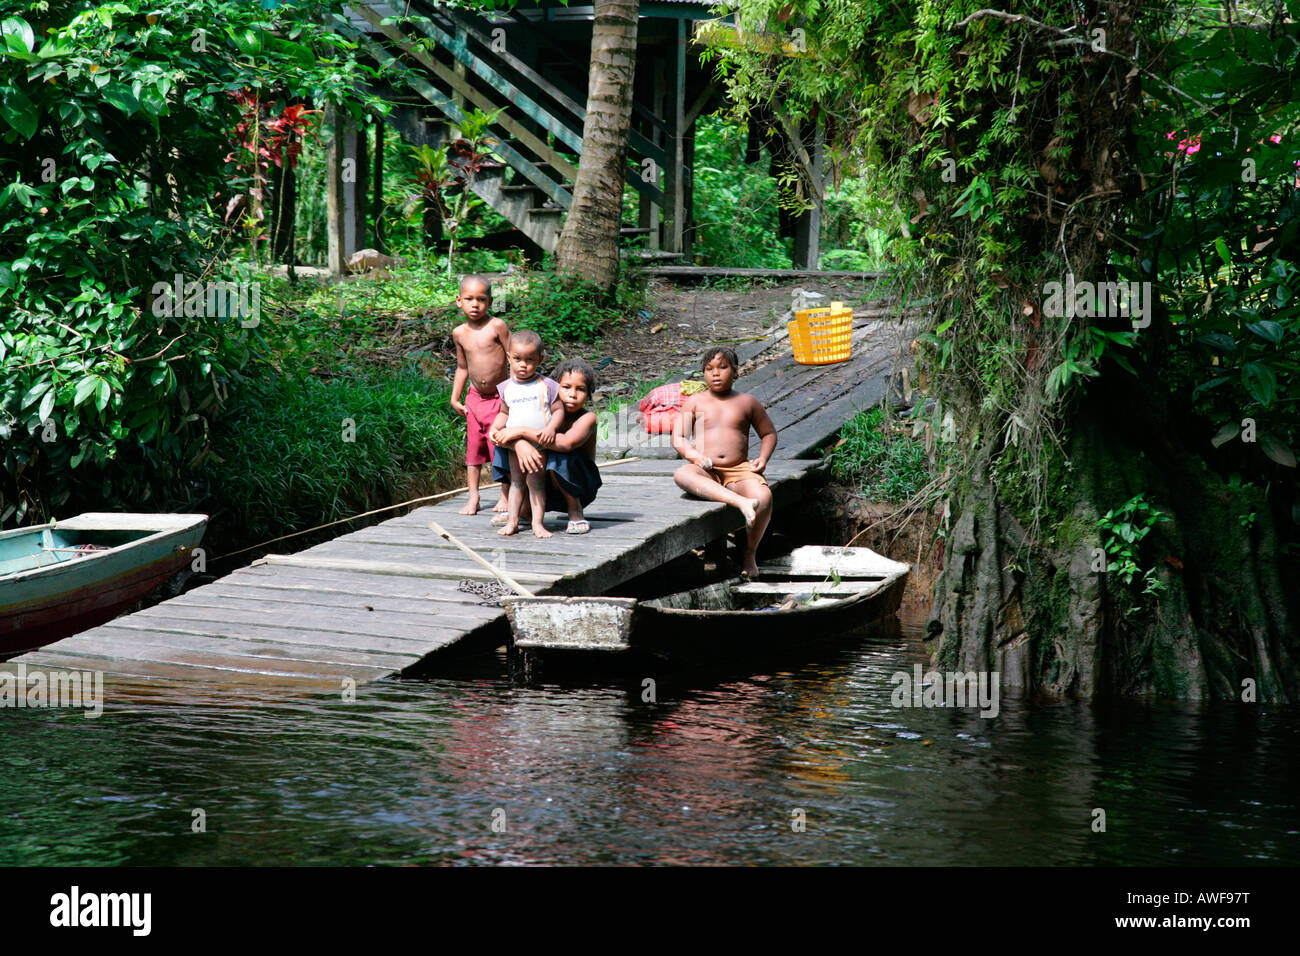 Children at a boat jetty, Kamuni river in the rain forest of Guayana, South America Stock Photo